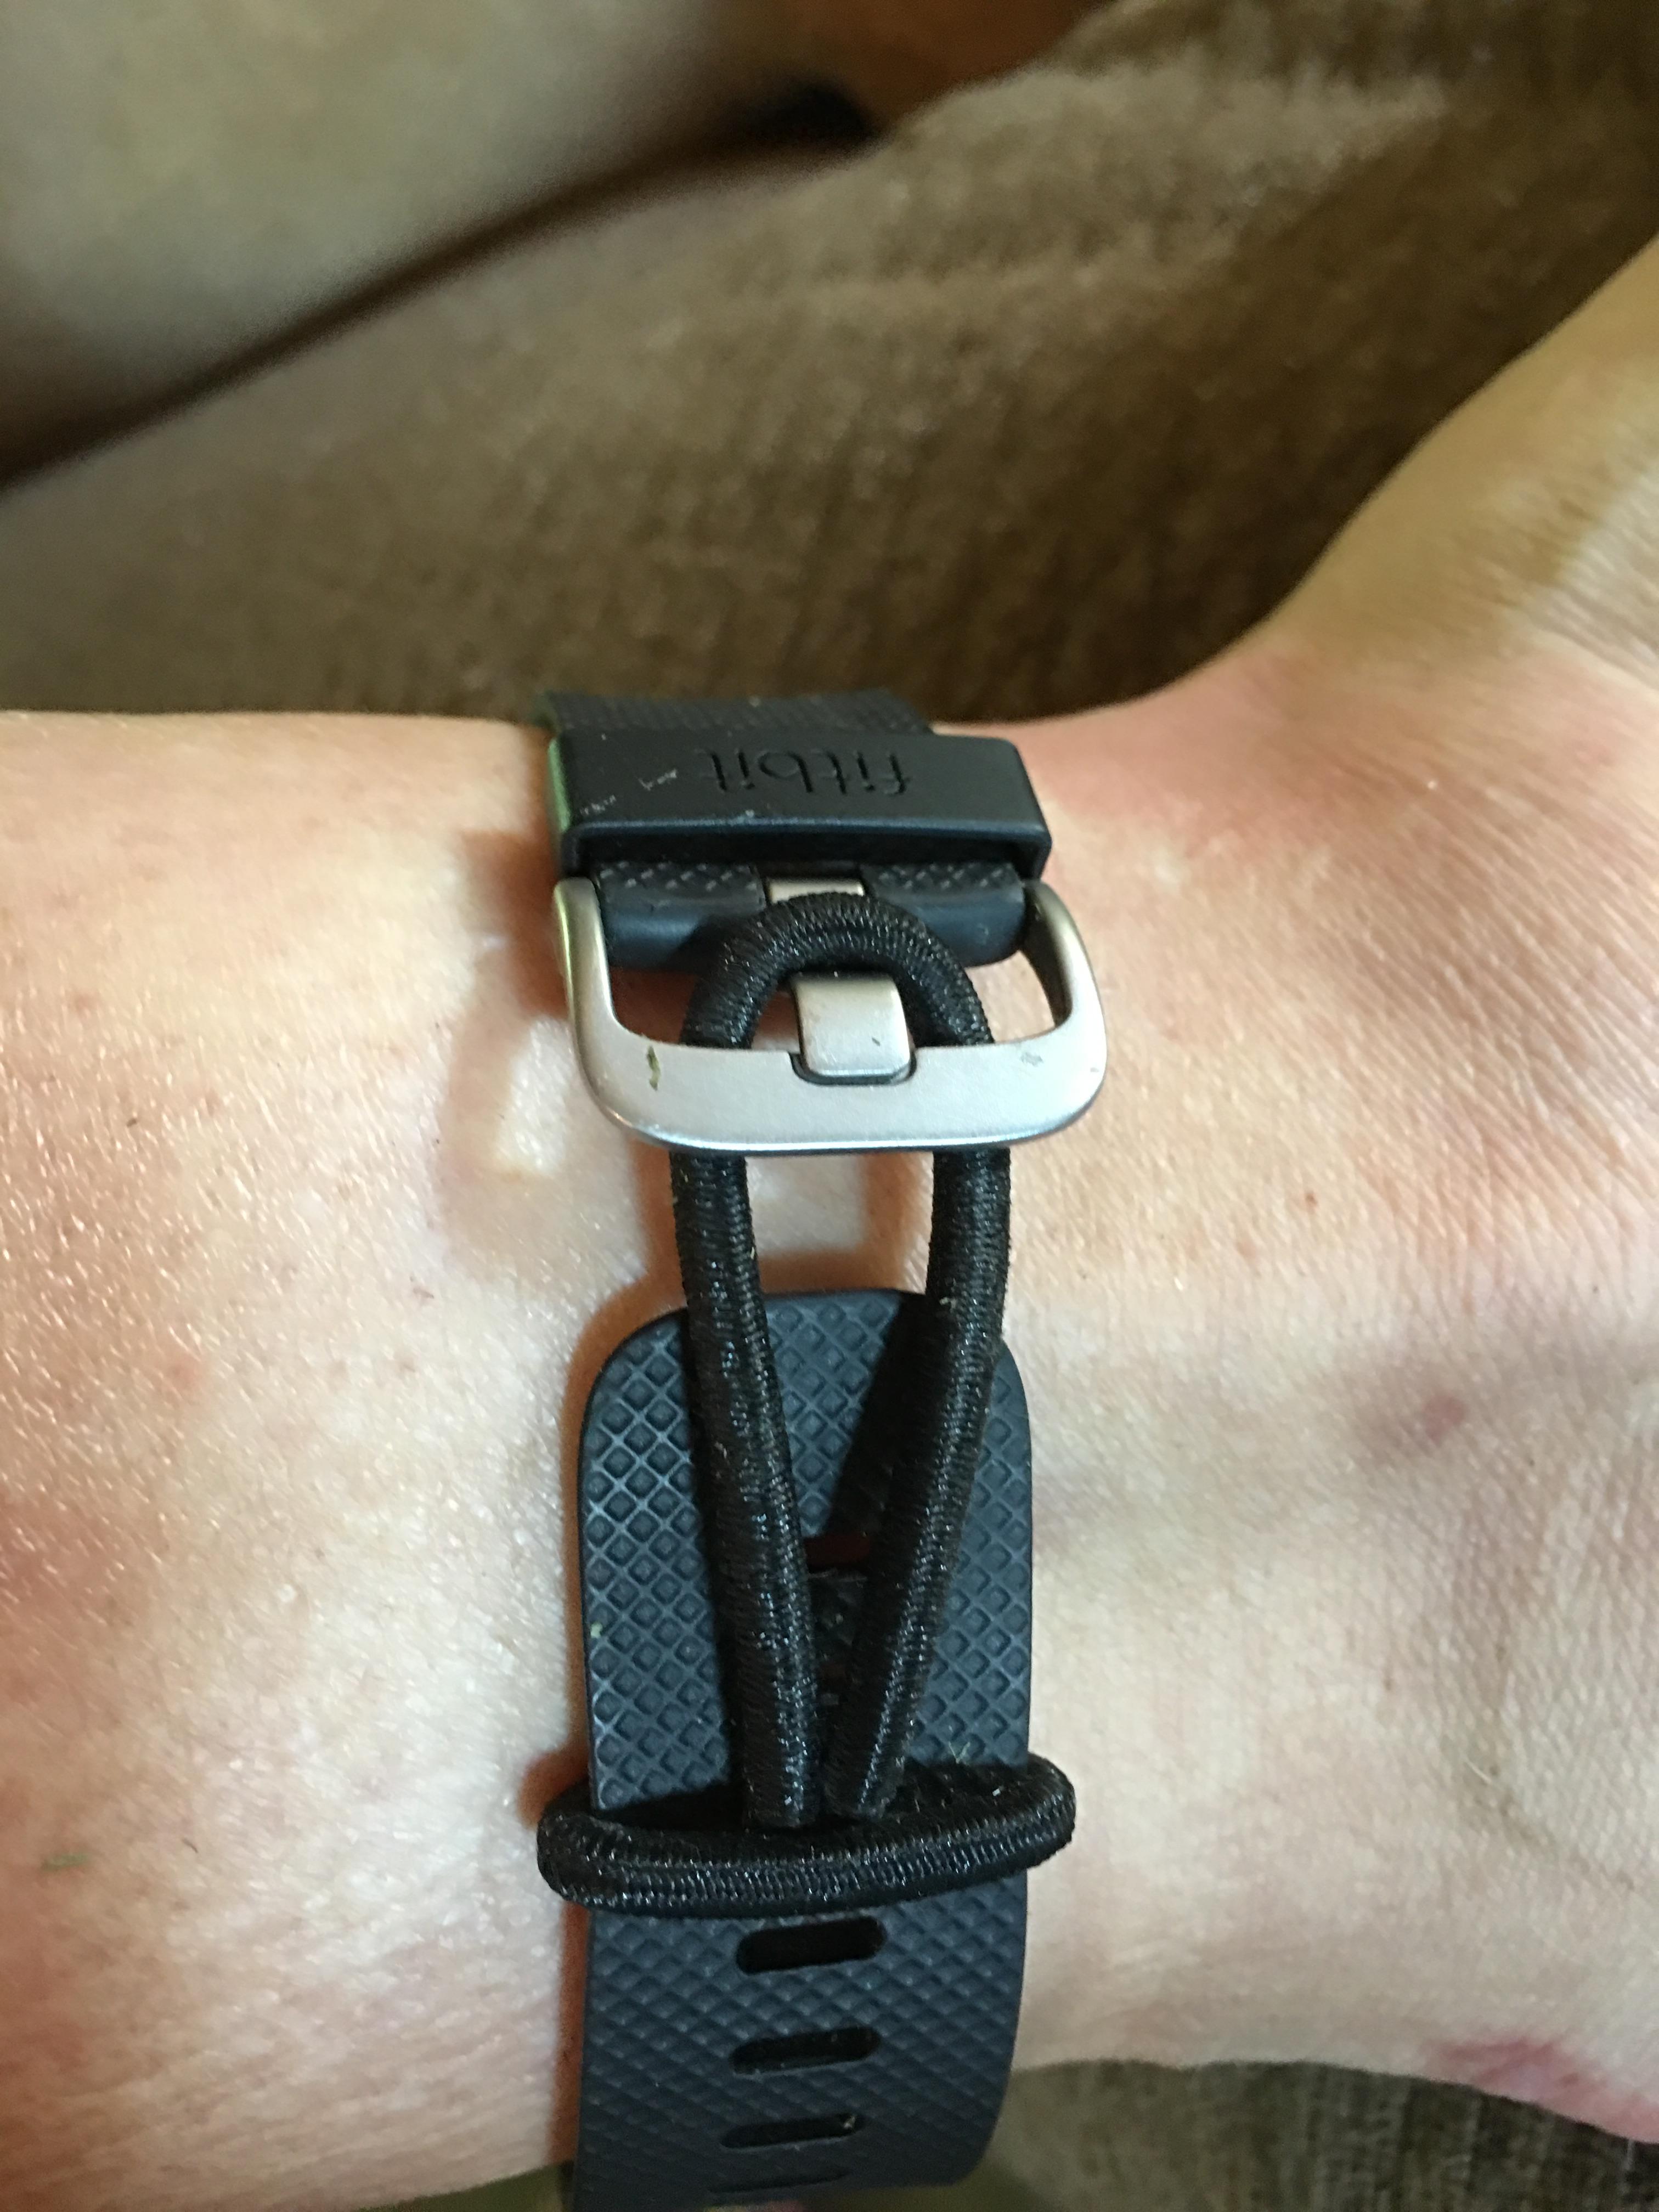 Ankle mode - Page 6 - Fitbit Community